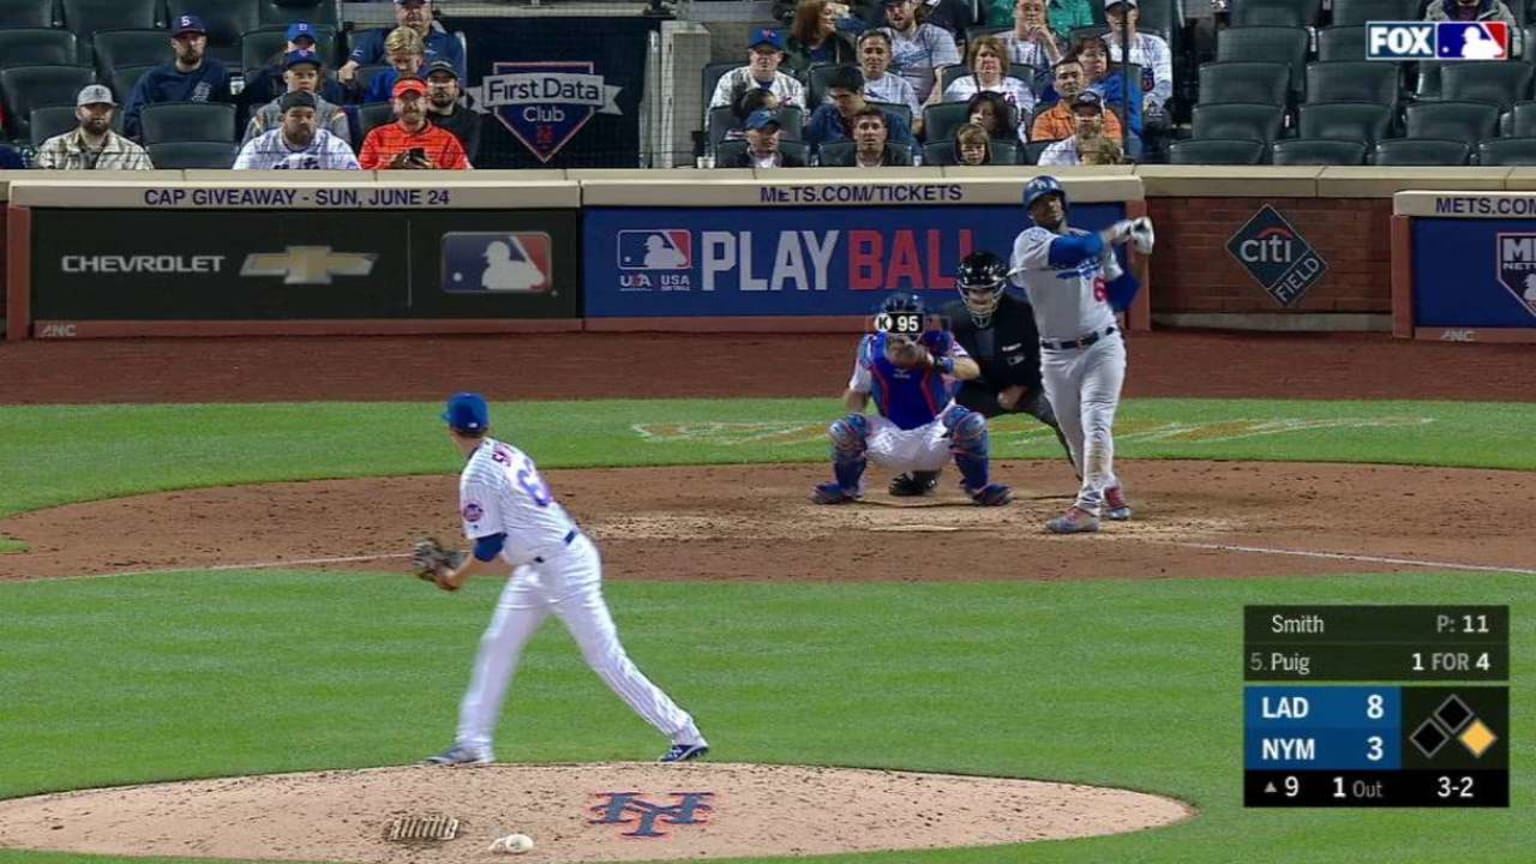 Smiths 1st career strikeout 06/23/2018 New York Mets